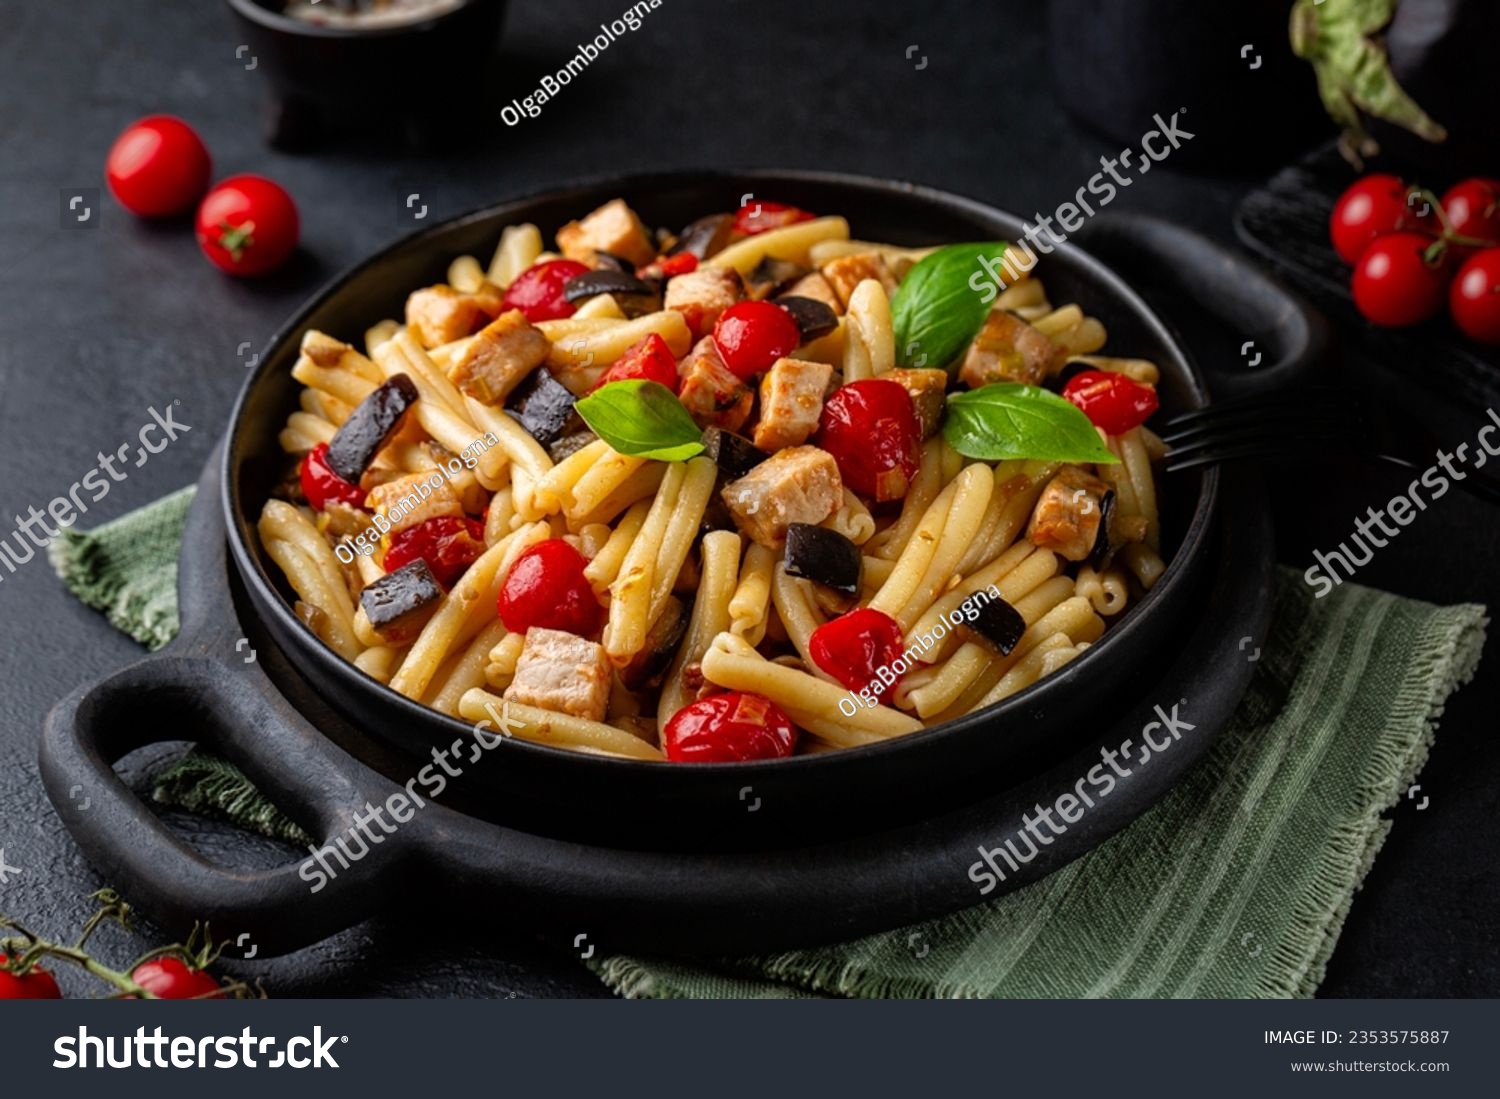 Sicilian pasta, casarecce with swordfish, tomato, and eggplant. Decorated with basil leaves. Dark table surface. #2353575887